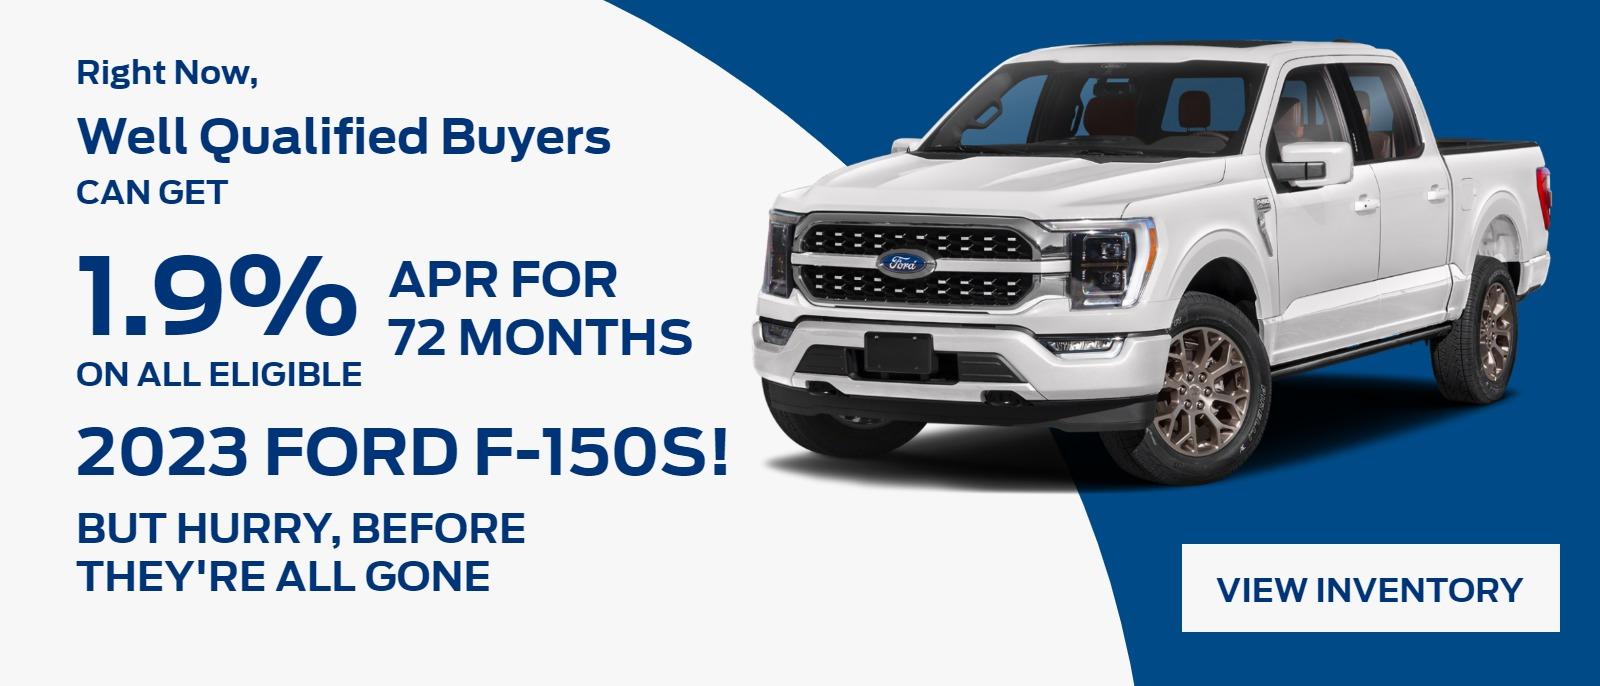 ight Now, Well Qualified Buyers Can Get 1.9% APR for 72 months on All Eligible 2023 Ford F-150s! But hurry, before they're all gone. See dealer for details